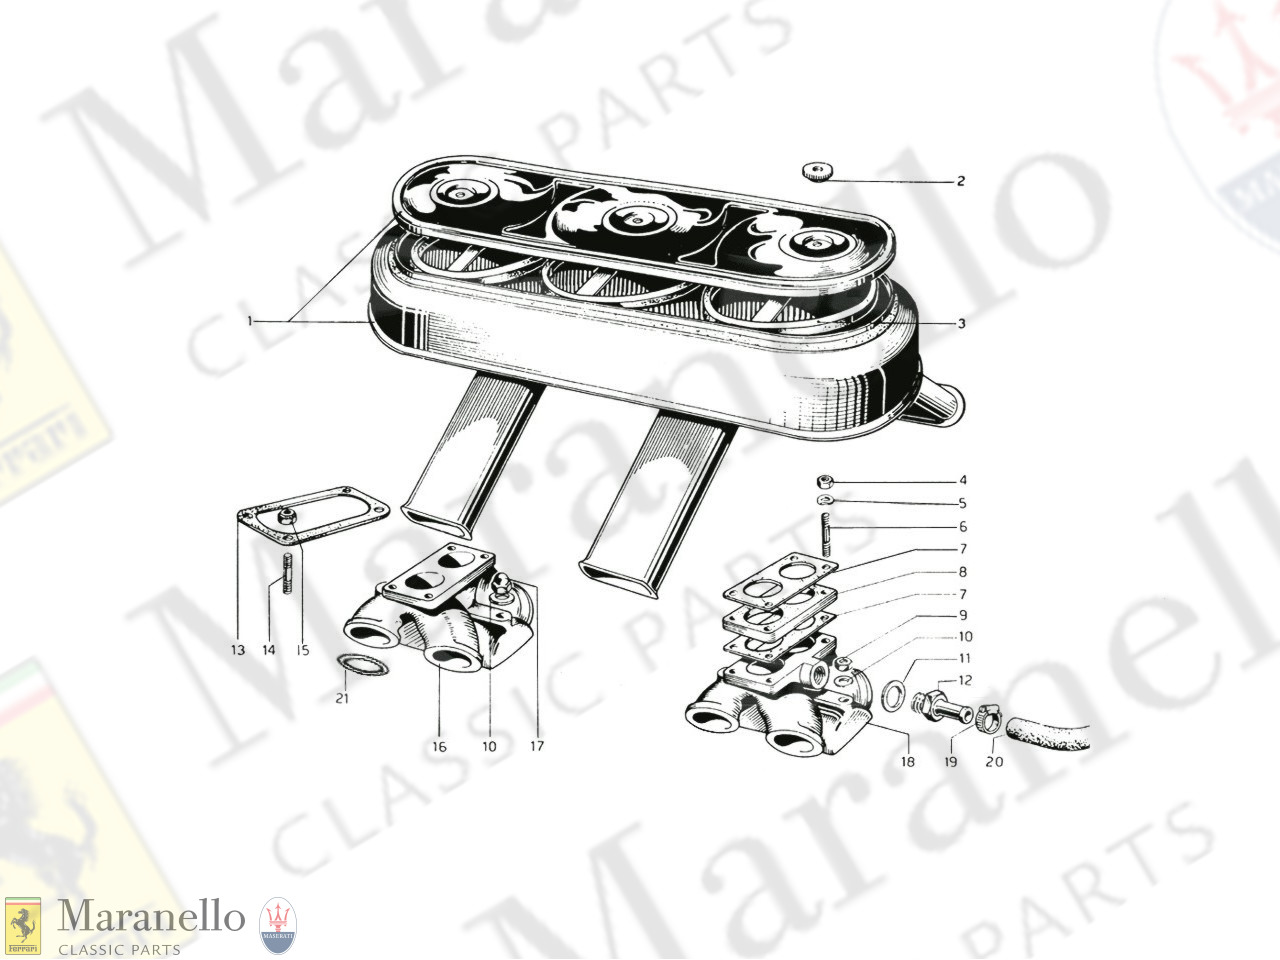 006 - Inlet Manifolds